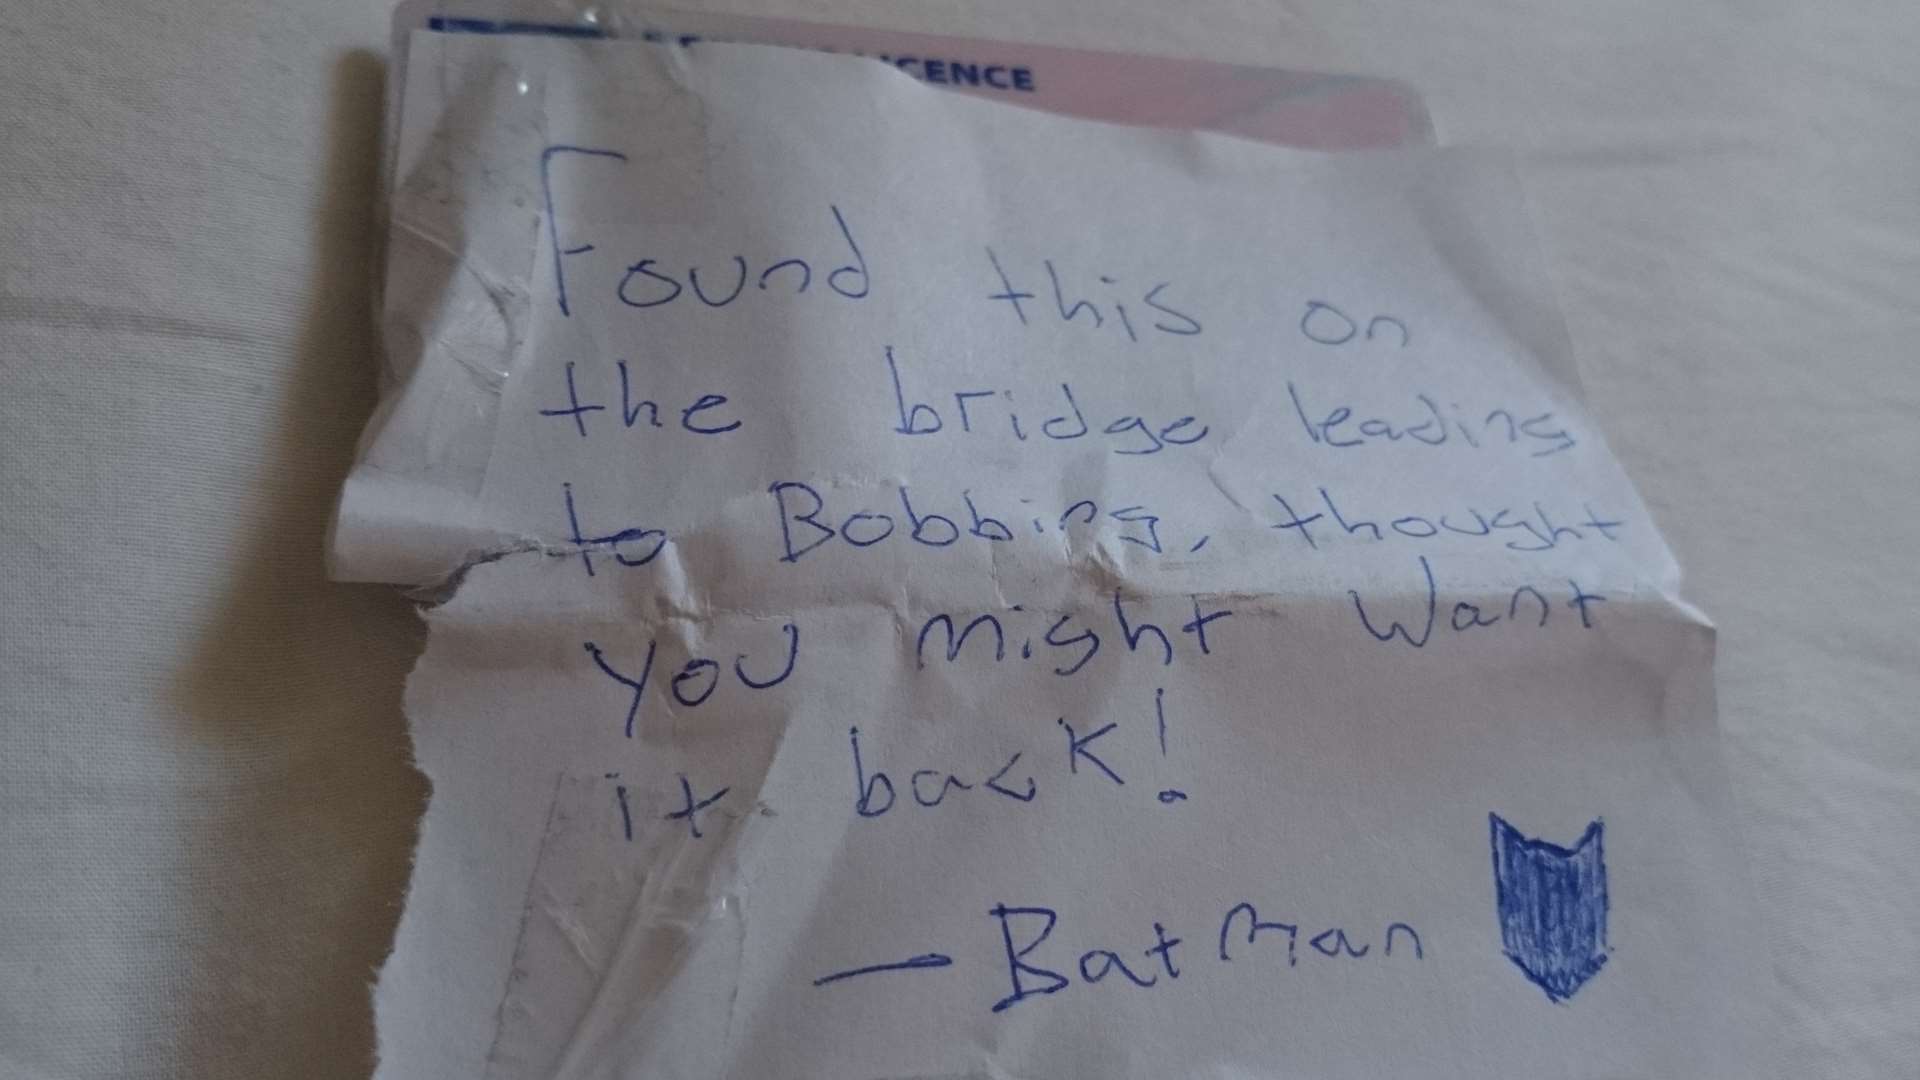 The note left by Batman